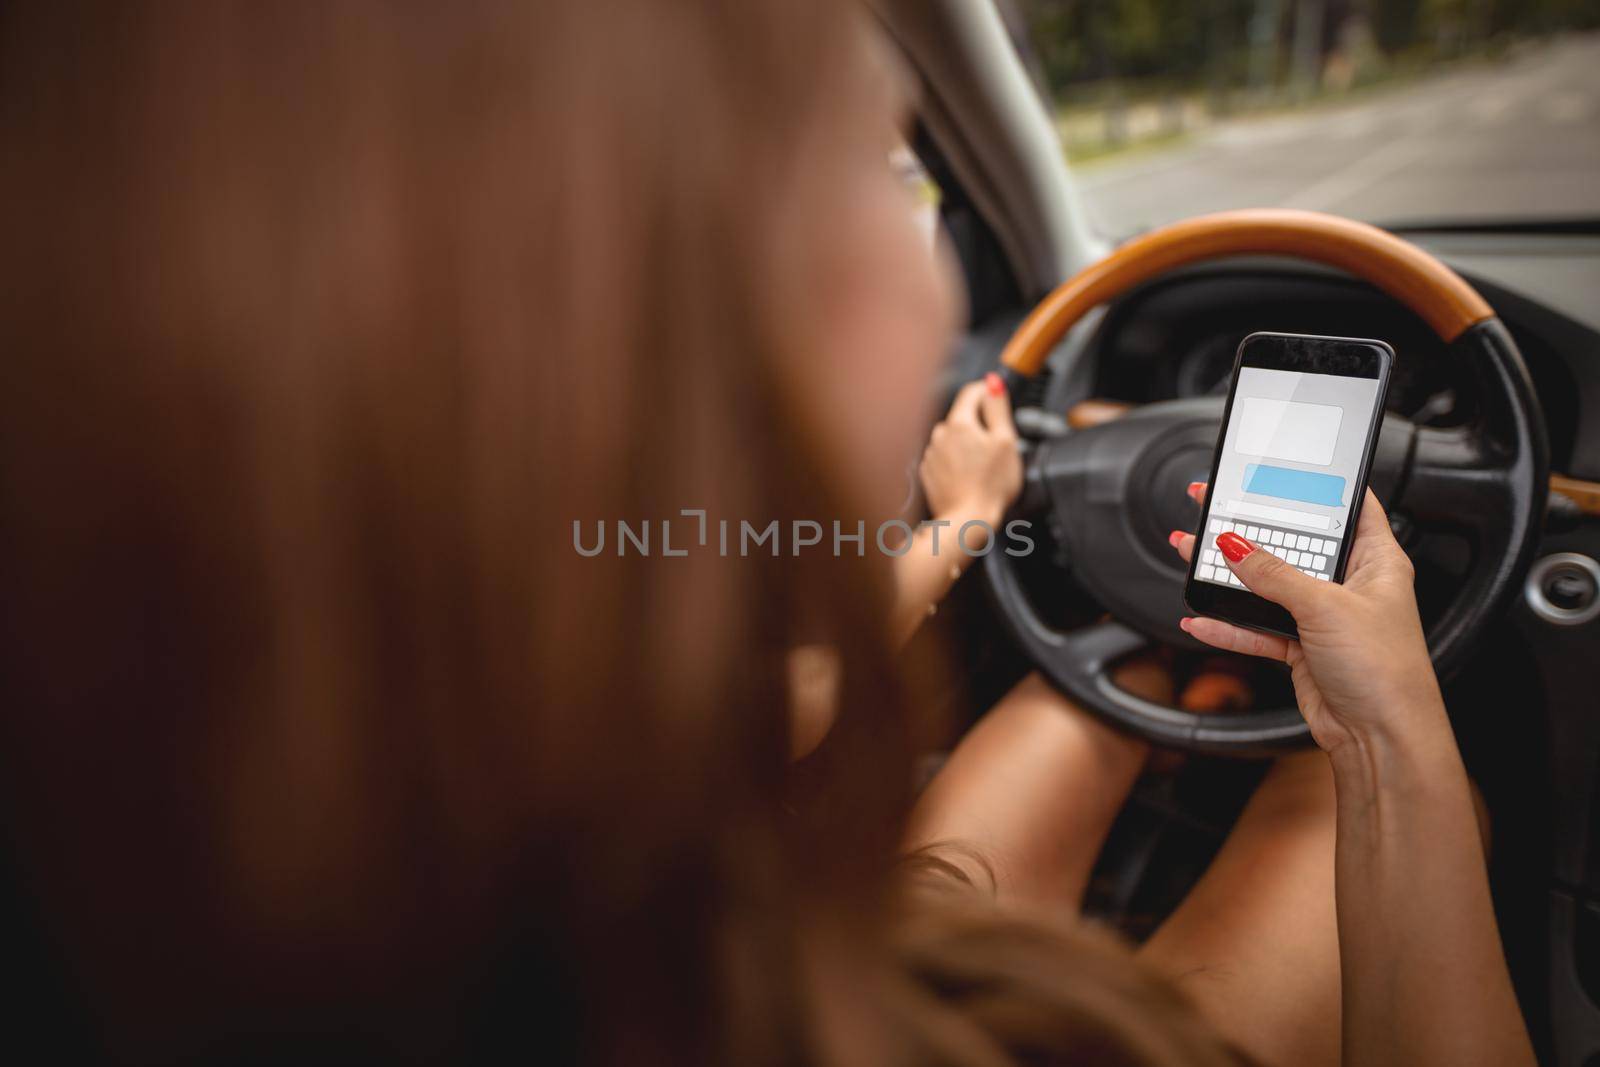 Woman texting on smartphone while driving a car.